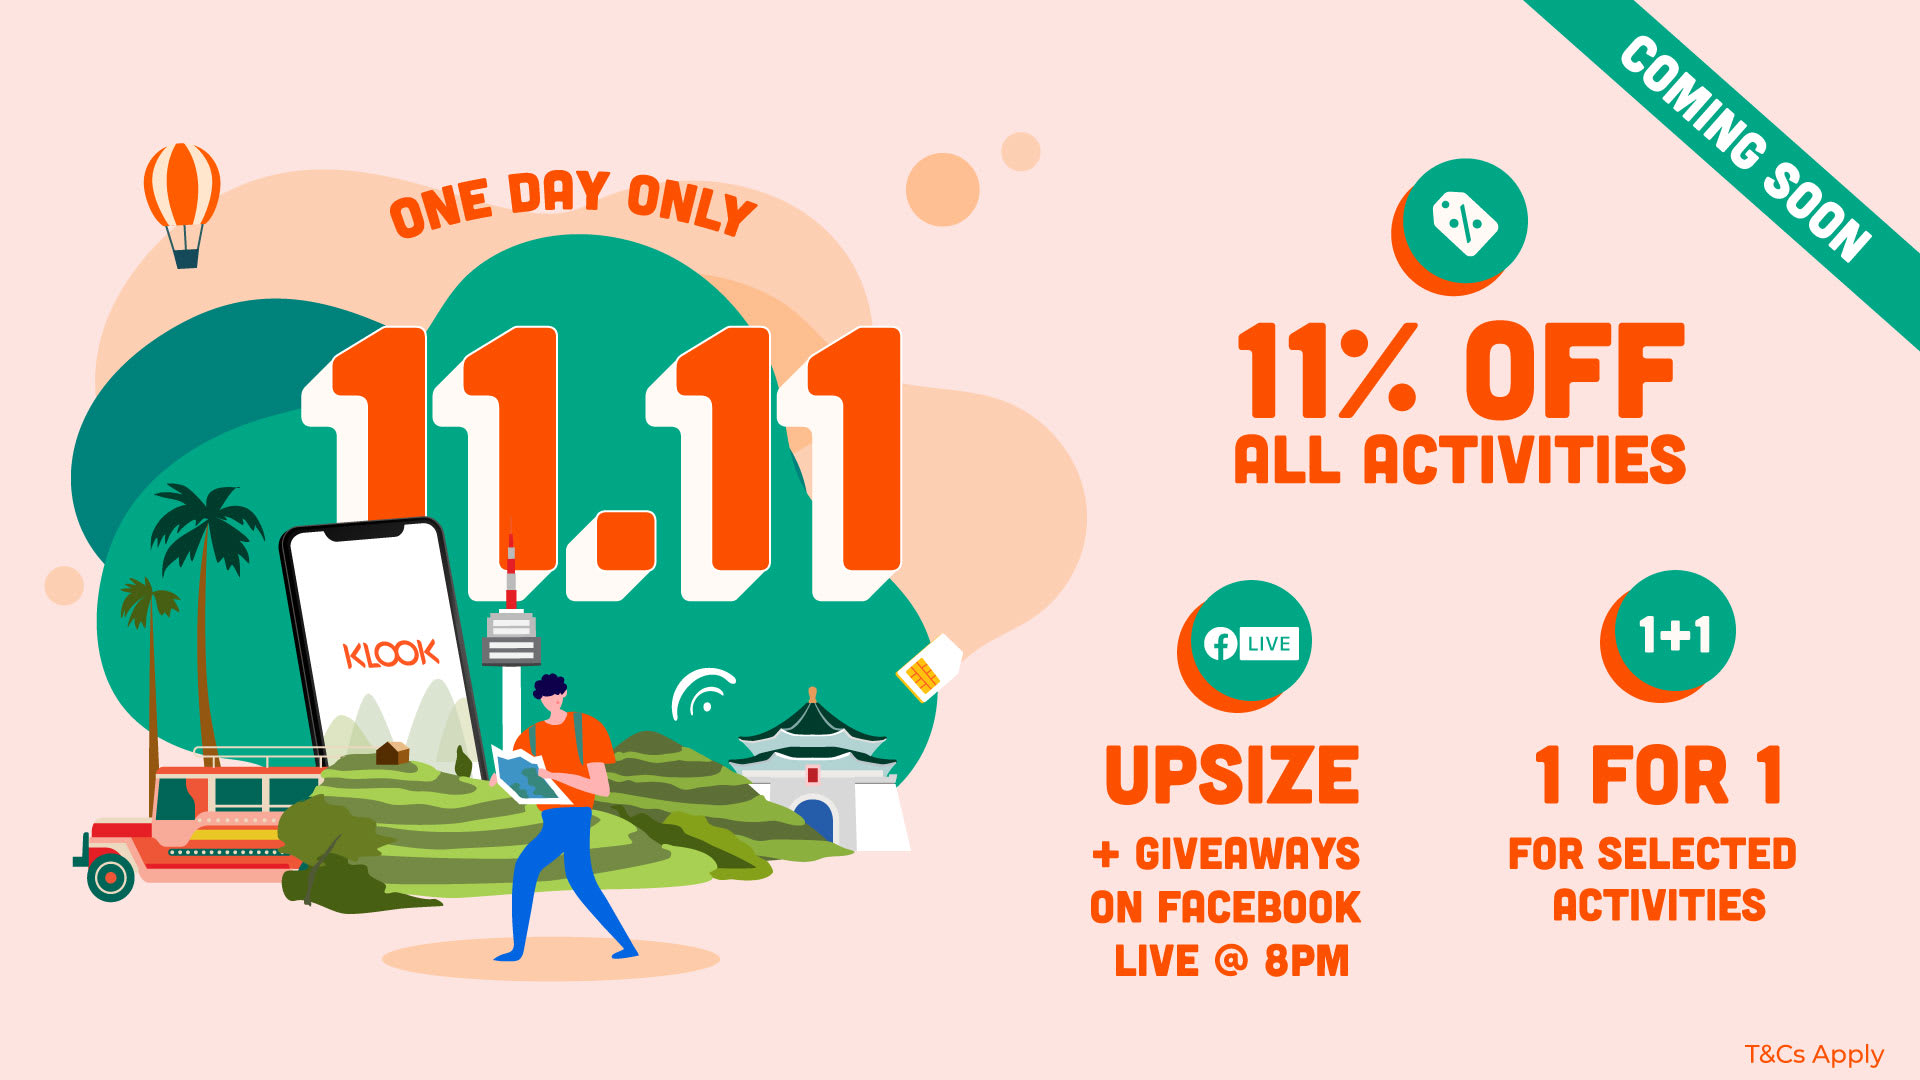 Standby For The 24 Hour 1111 Sale On Klook For Epic Deals